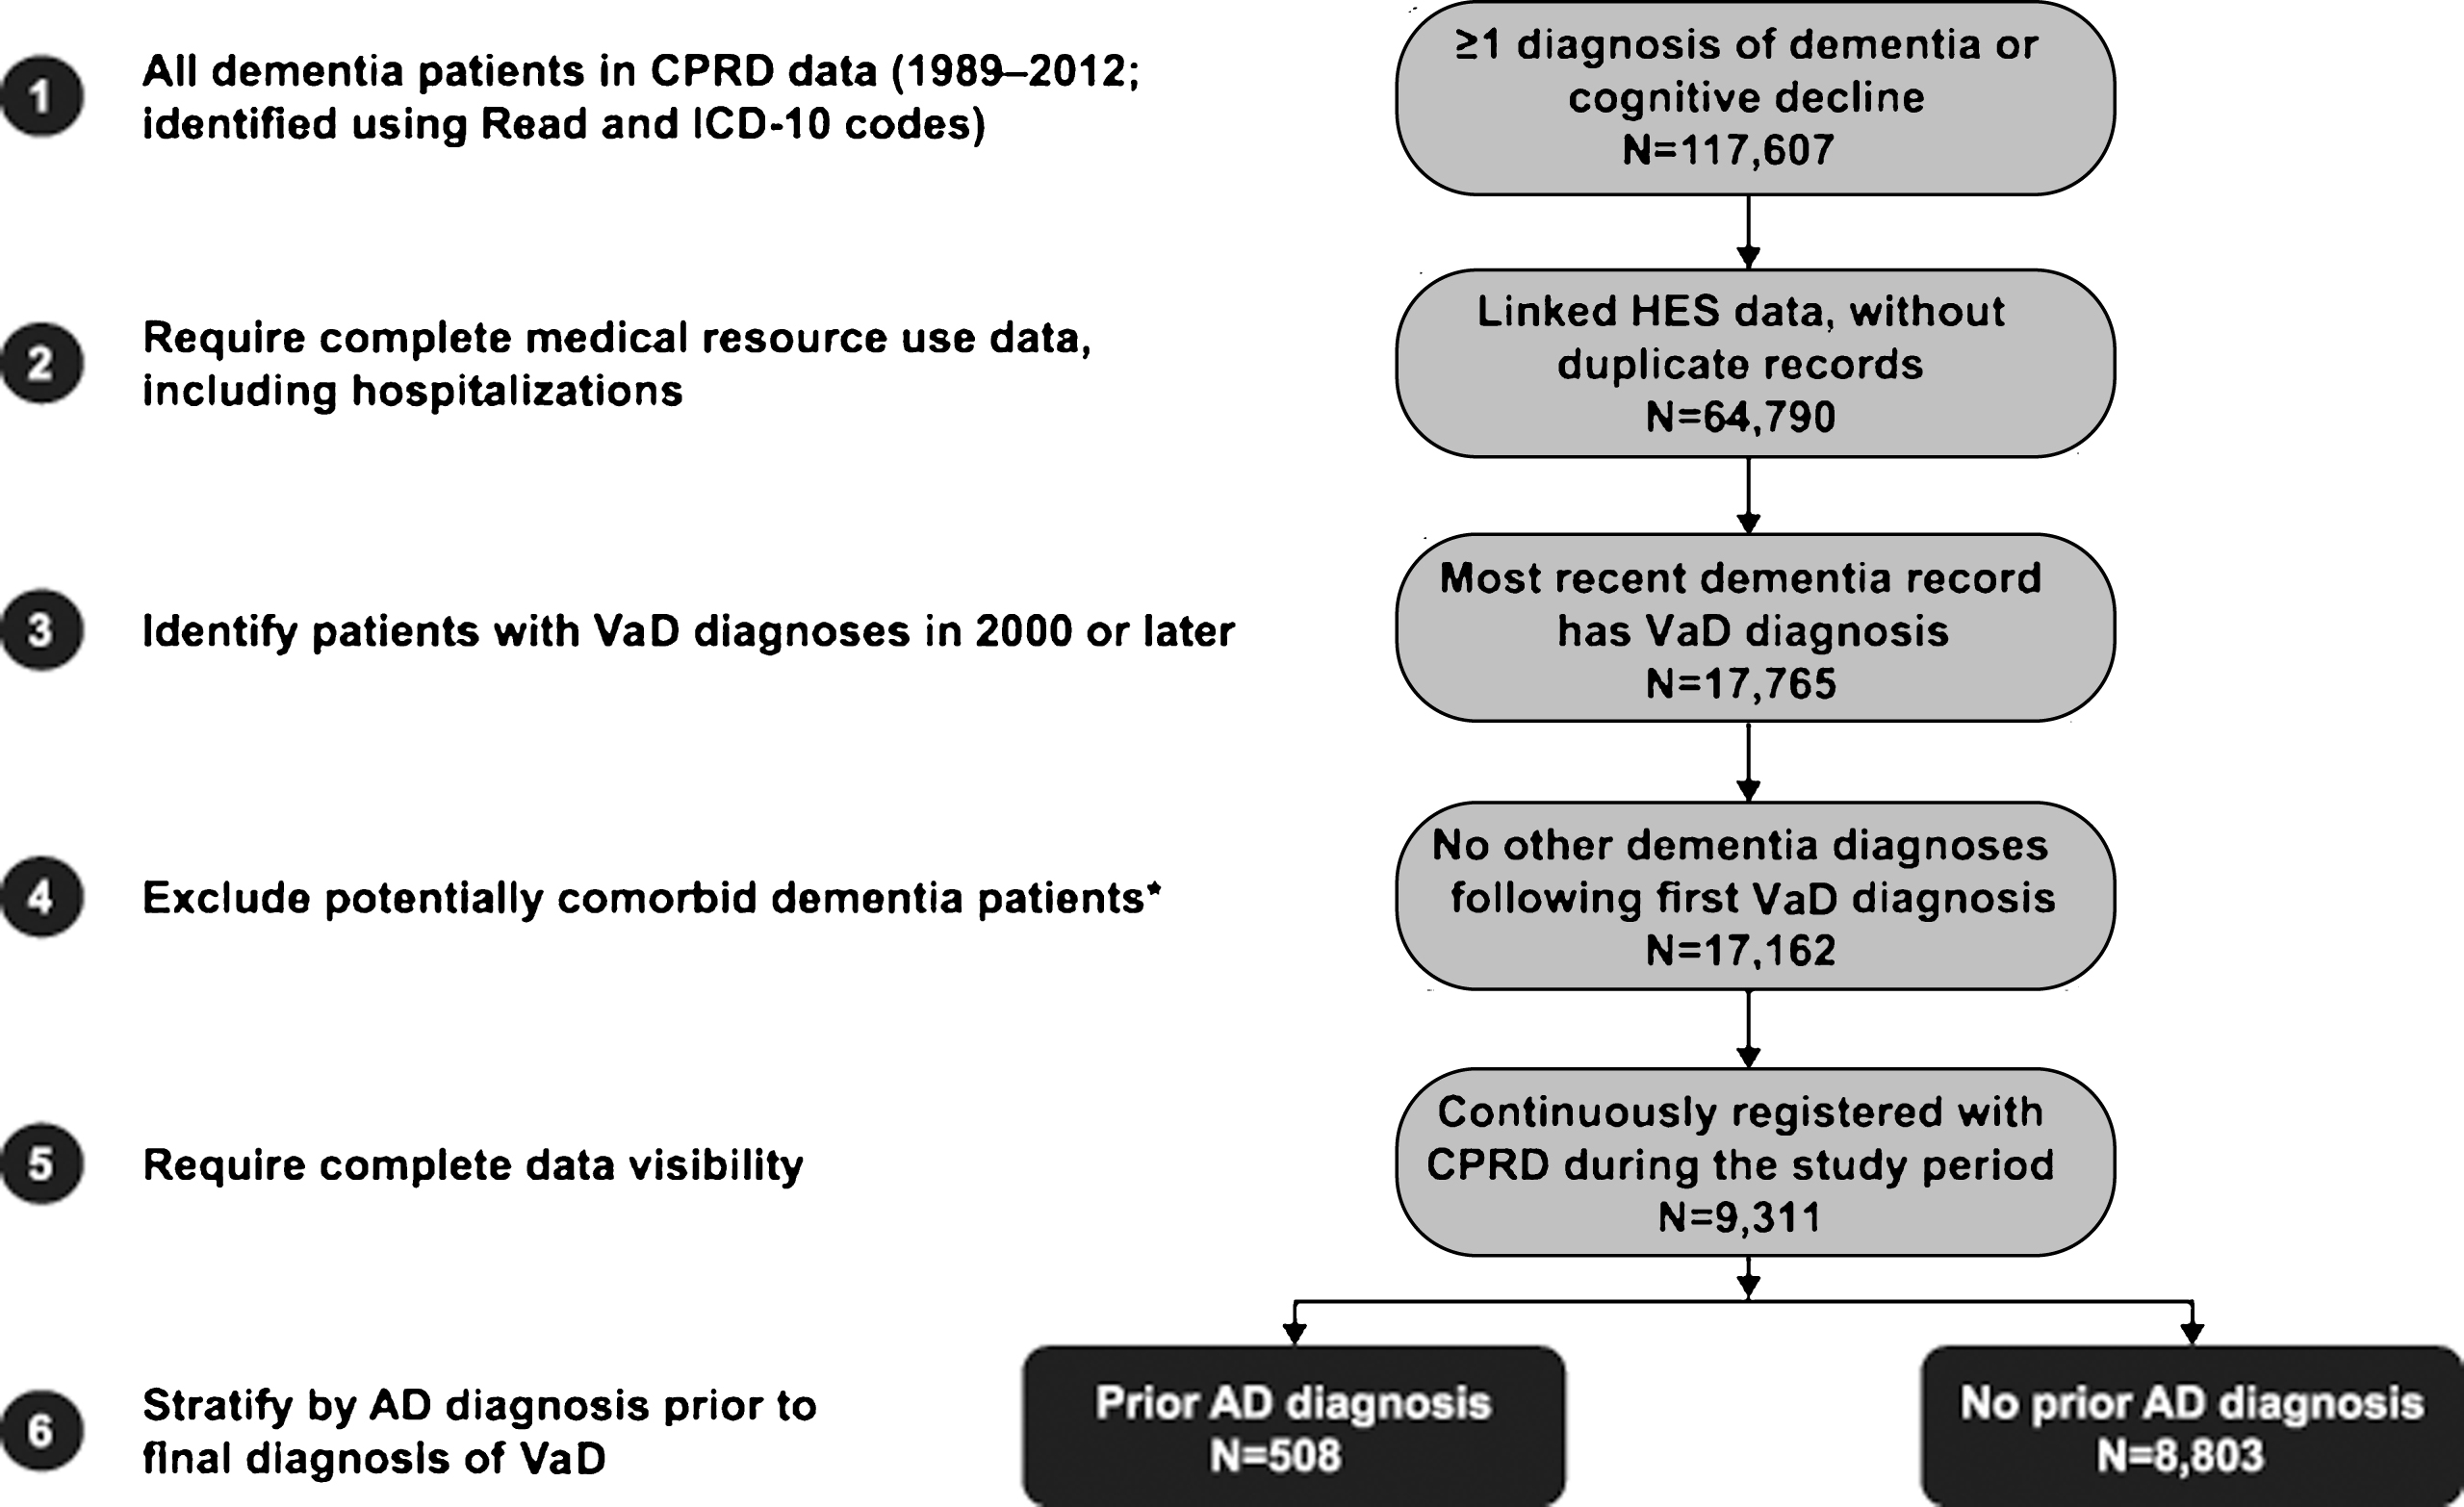 Derivation of study cohorts. *To reduce the likelihood of mixed dementias, patients with multiple vascular dementia (VaD) diagnoses were removed if they had an indication of other types of dementia (e.g., dementia with Lewy bodies) between their first and last VaD diagnoses. AD, Alzheimer’s disease; CPRD, Clinical Practice Research Datalink; HES, Hospital Episode Statistics; ICD-10, International Classification of Diseases.